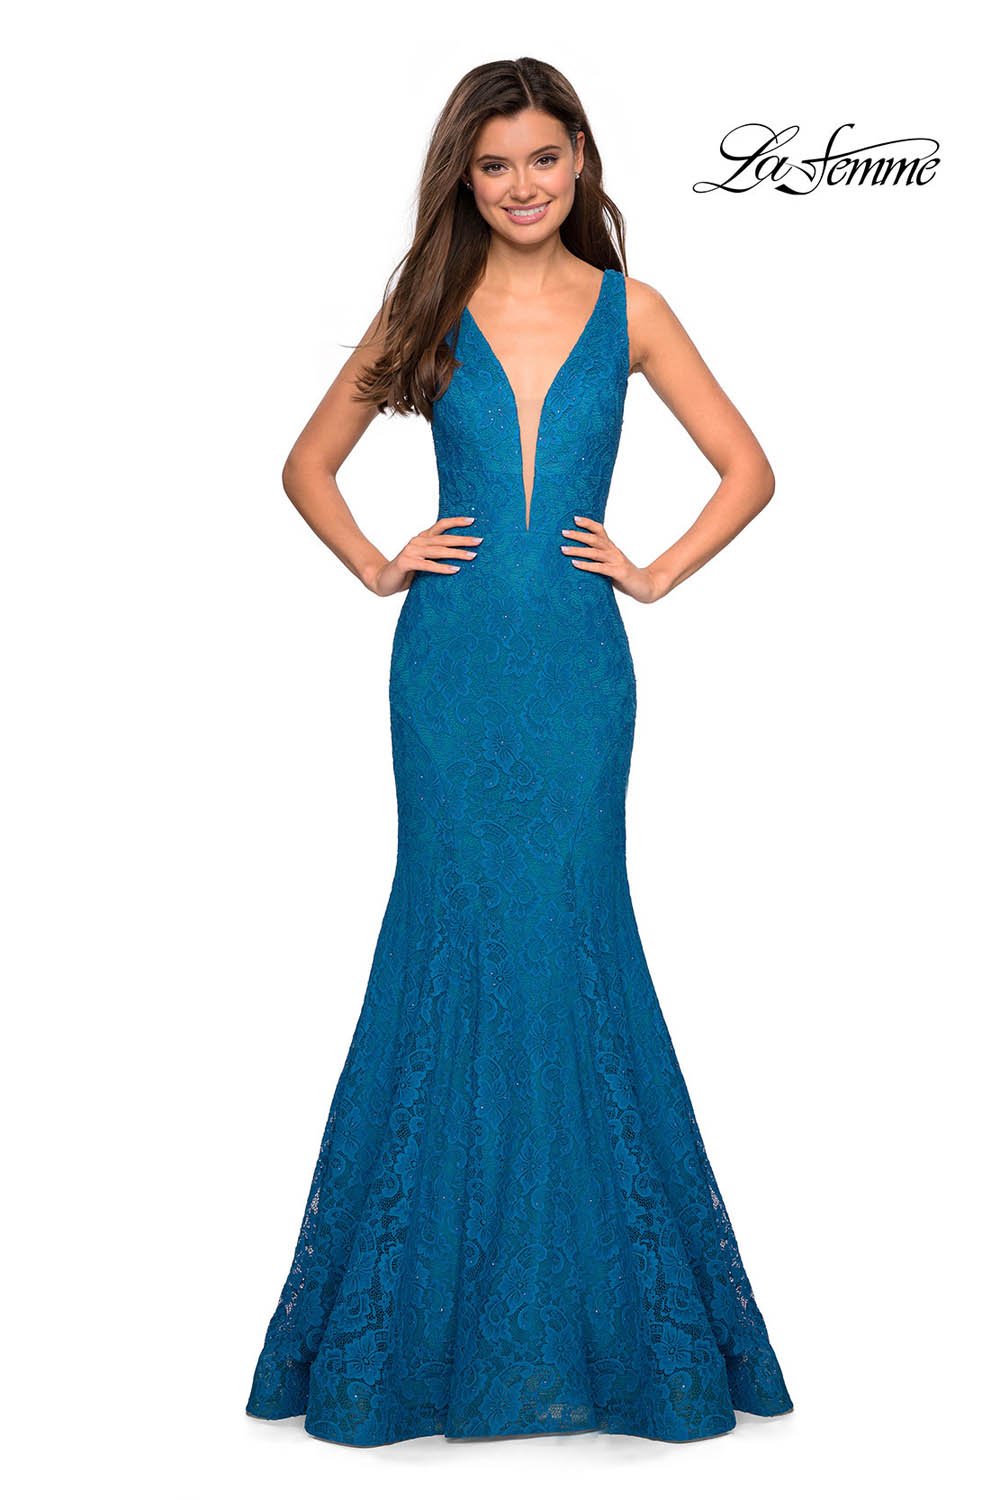 La Femme 27464 dress images in these colors: Dark Berry, Dark Turquoise, Electric Blue, Navy.